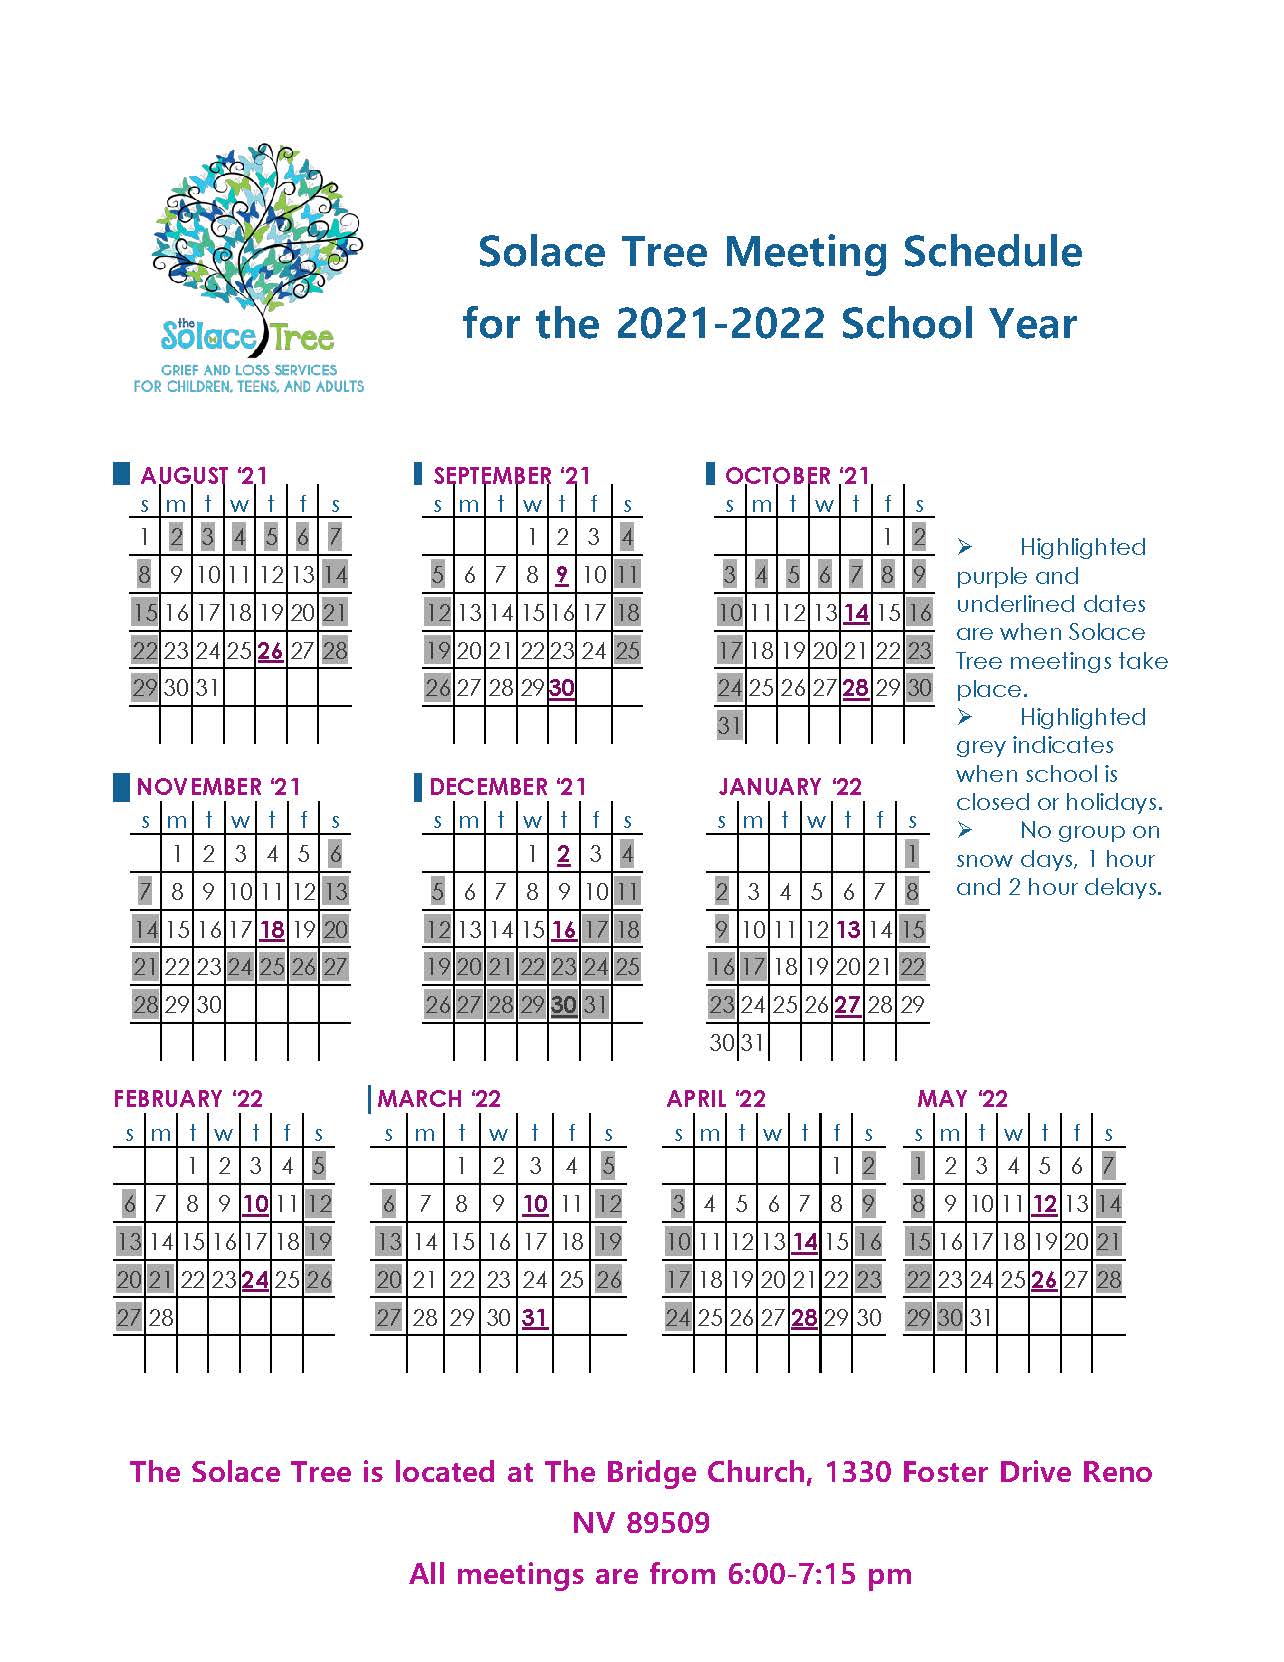 Solace Tree Meeting Schedule for 2021-2022